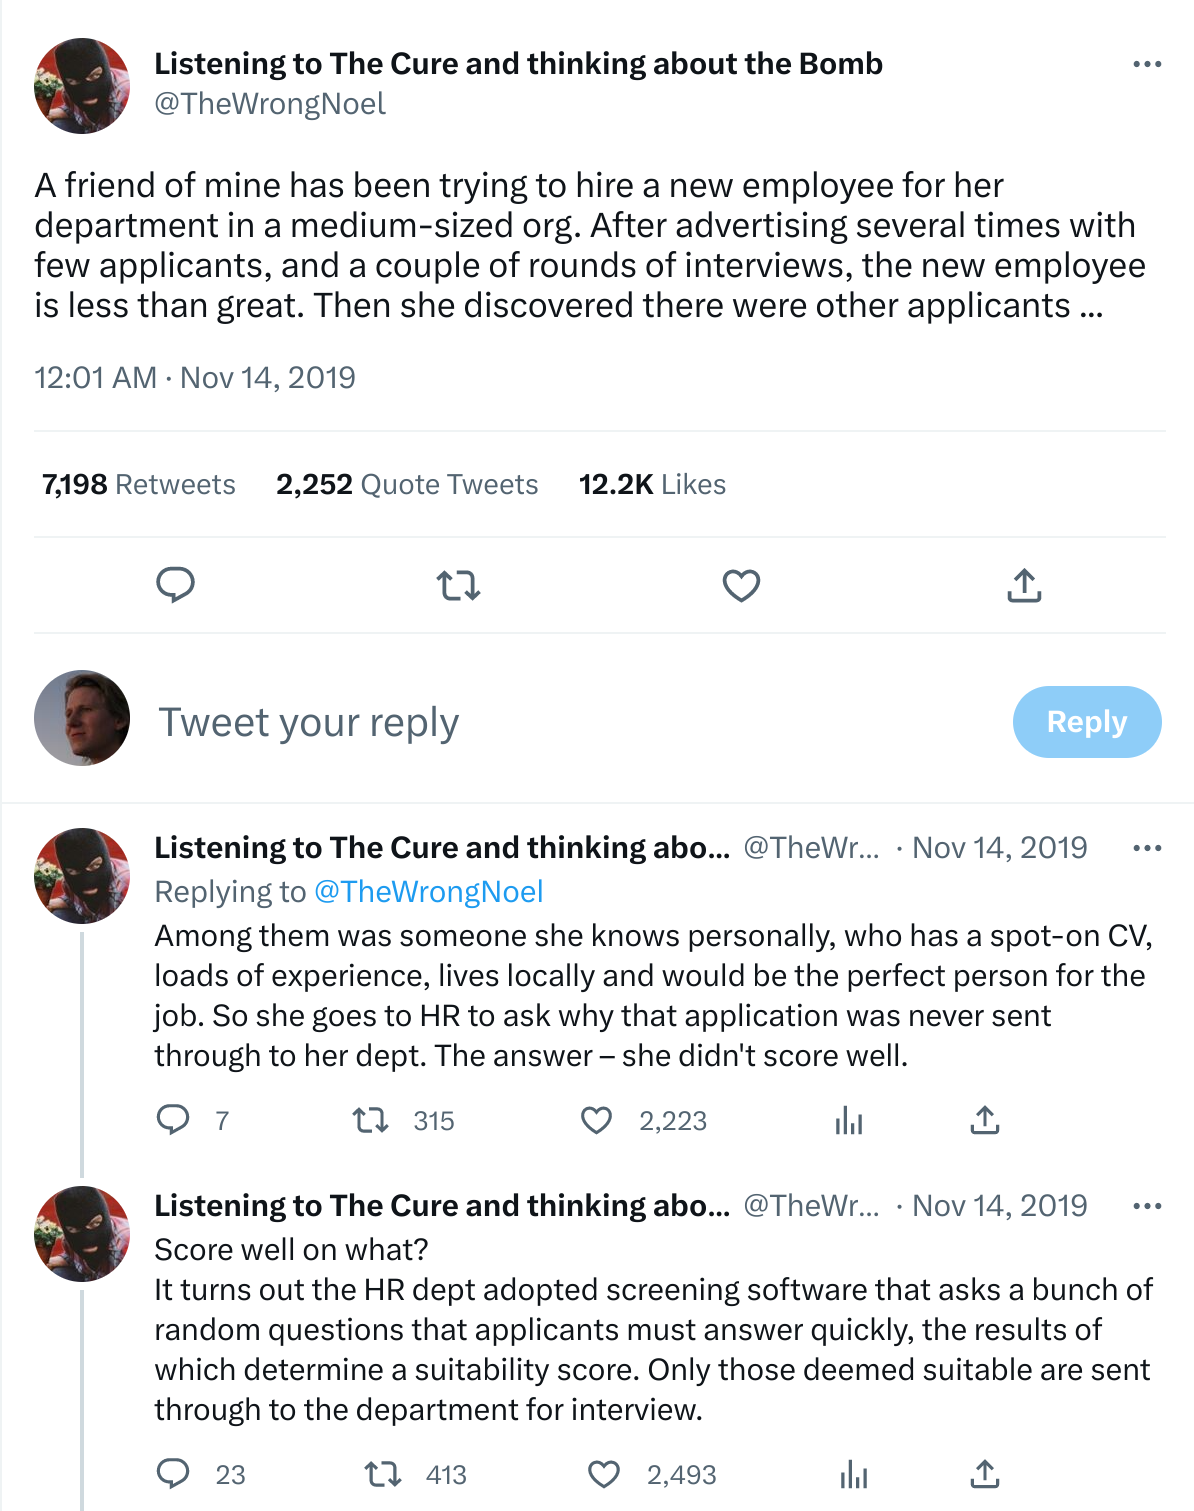 Screenshot of a thread of three messages on Twitter from 2019 reading "A friend of mine has been trying to hire a new employee for her department in a medium-sized org. After advertising several times with few applicants, and a couple of rounds of interviews, the new employee is less than great. Then she discovered there were other applicants ..." -- "Among them was someone she knows personally, who has a spot-on CV, loads of experience, lives locally and would be the perfect person for the job. So she goes to HR to ask why that application was never sent through to her dept. The answer – she didn't score well. " -- "It turns out the HR dept adopted screening software that asks a bunch of random questions that applicants must answer quickly, the results of which determine a suitability score. Only those deemed suitable are sent through to the department for interview."